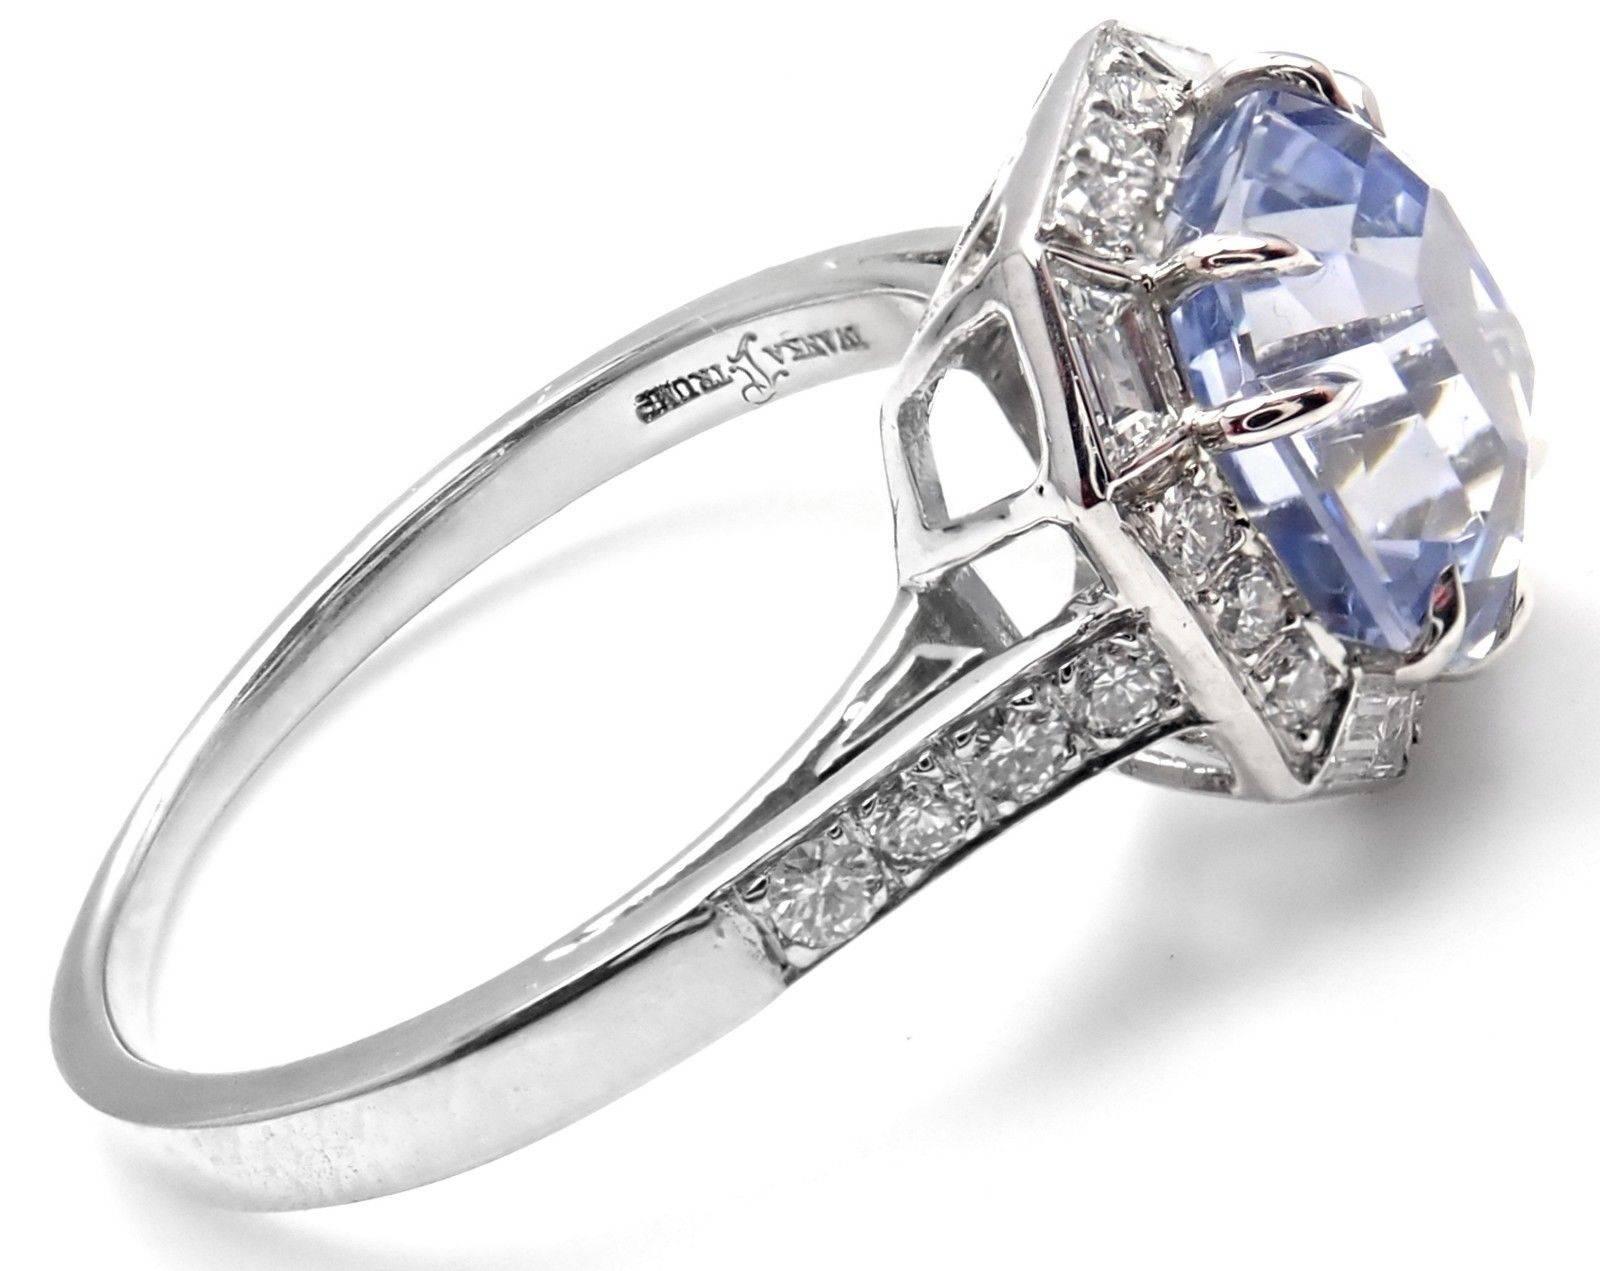 Platinum Diamond Sapphire Ring by Ivanka Trump.
With 20 round shape diamonds and 6 marque cut diamonds VS1 clarity G color and 4 trapezoid shape diamonds VS1 clarity, G color total weight approx. .50ct
1 sapphire total weight approx.